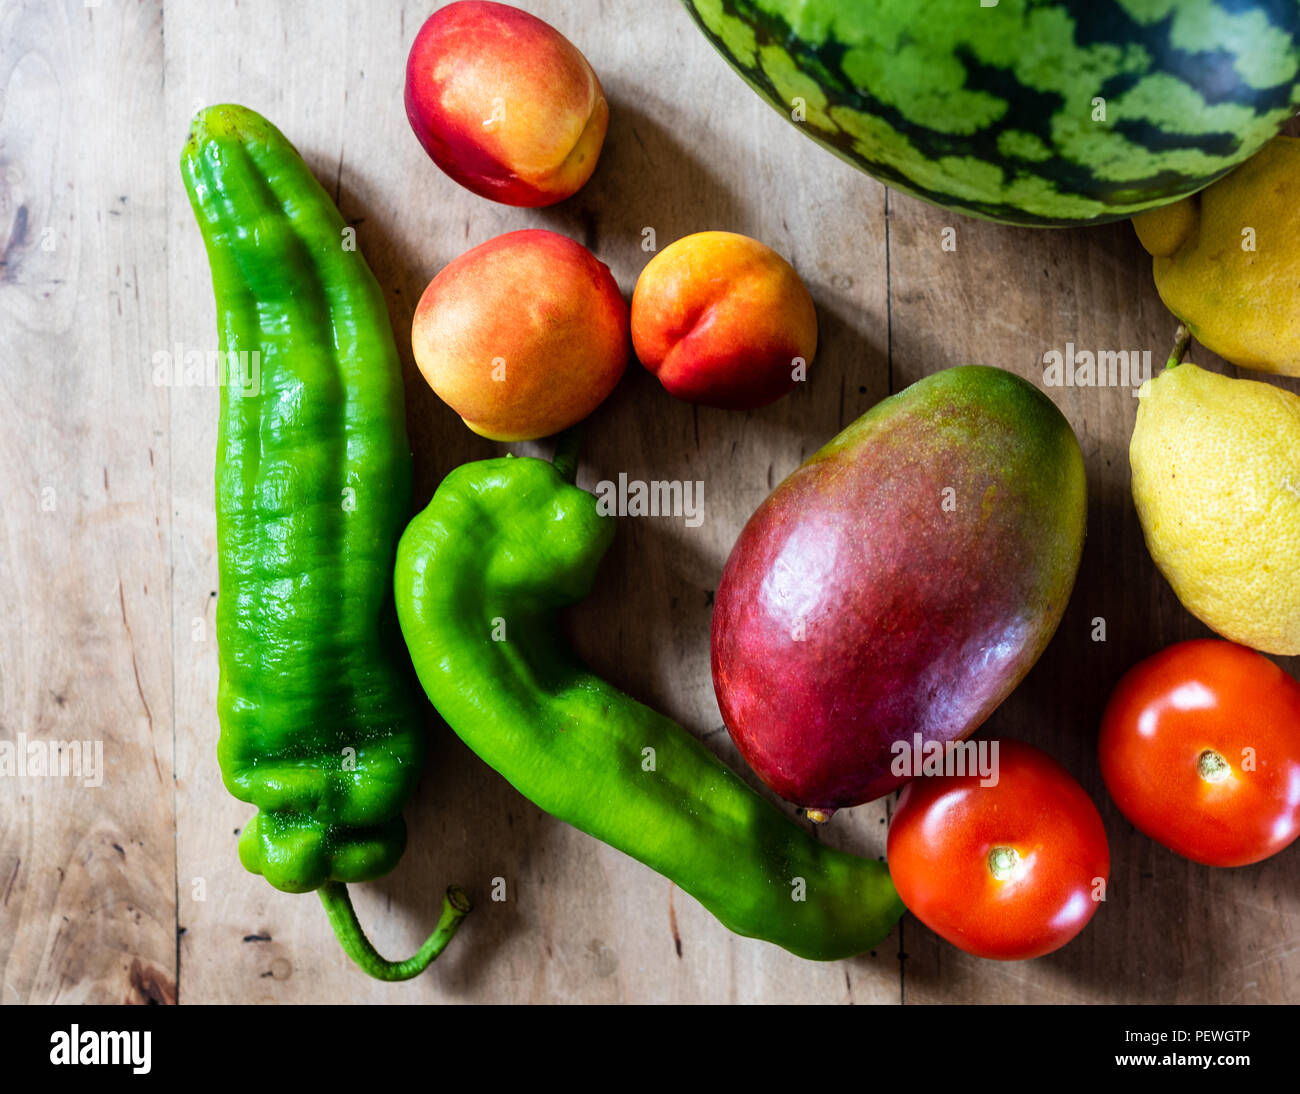 fresh fruits and vegetables on wooden table Stock Photo